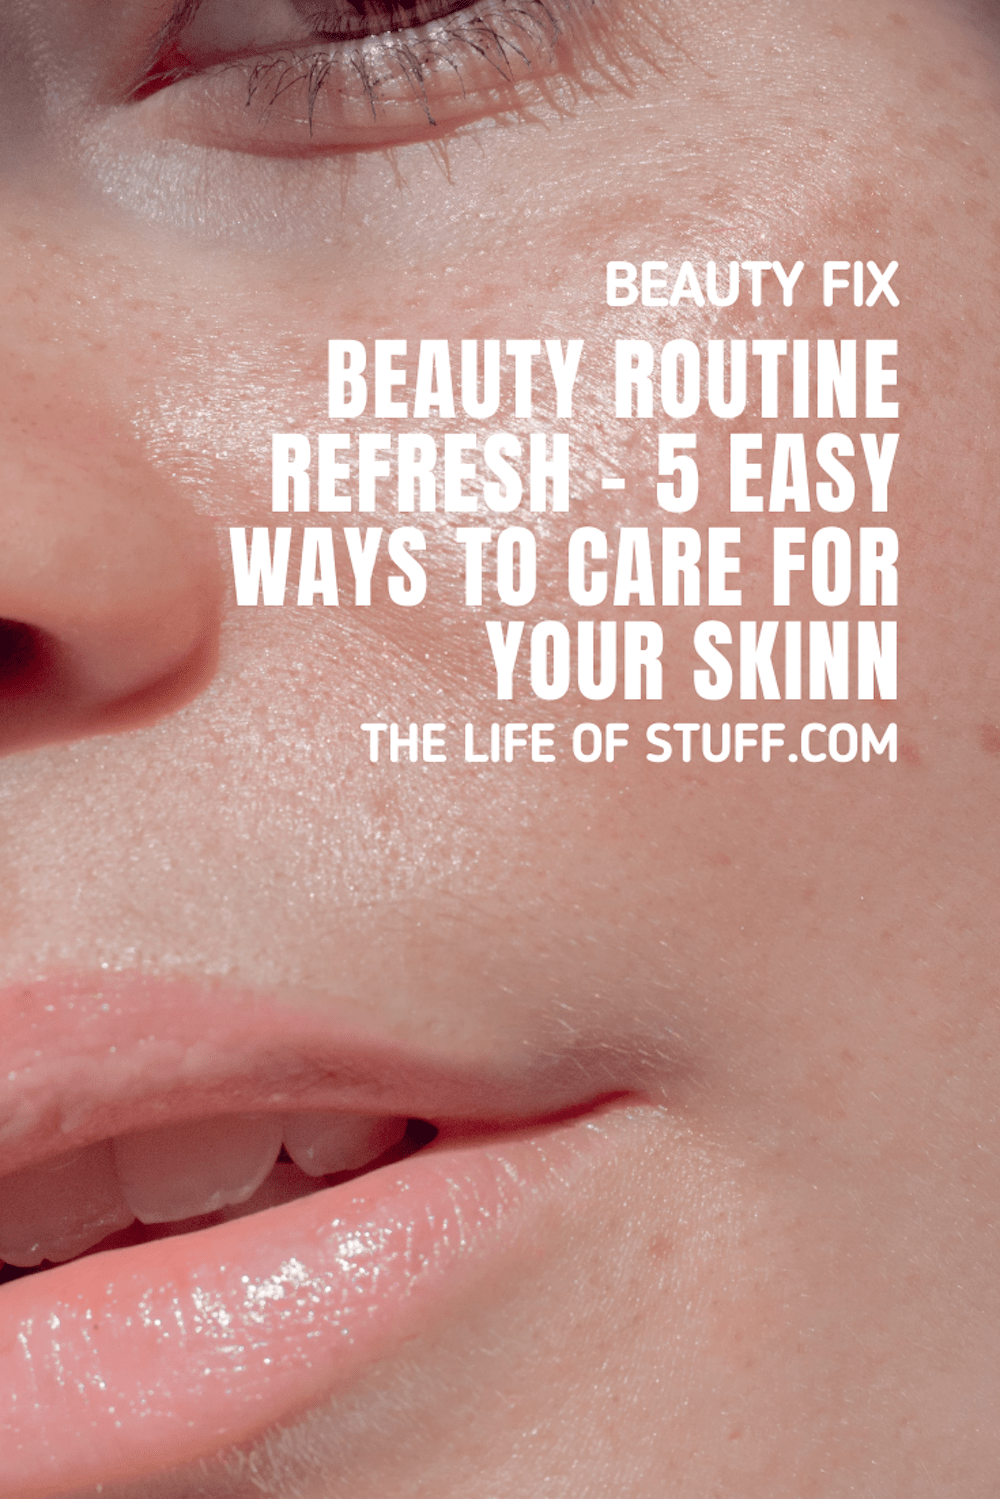 Beauty Routine Refresh - 5 Easy Ways To Care For Your Skin - The Life of Stuff